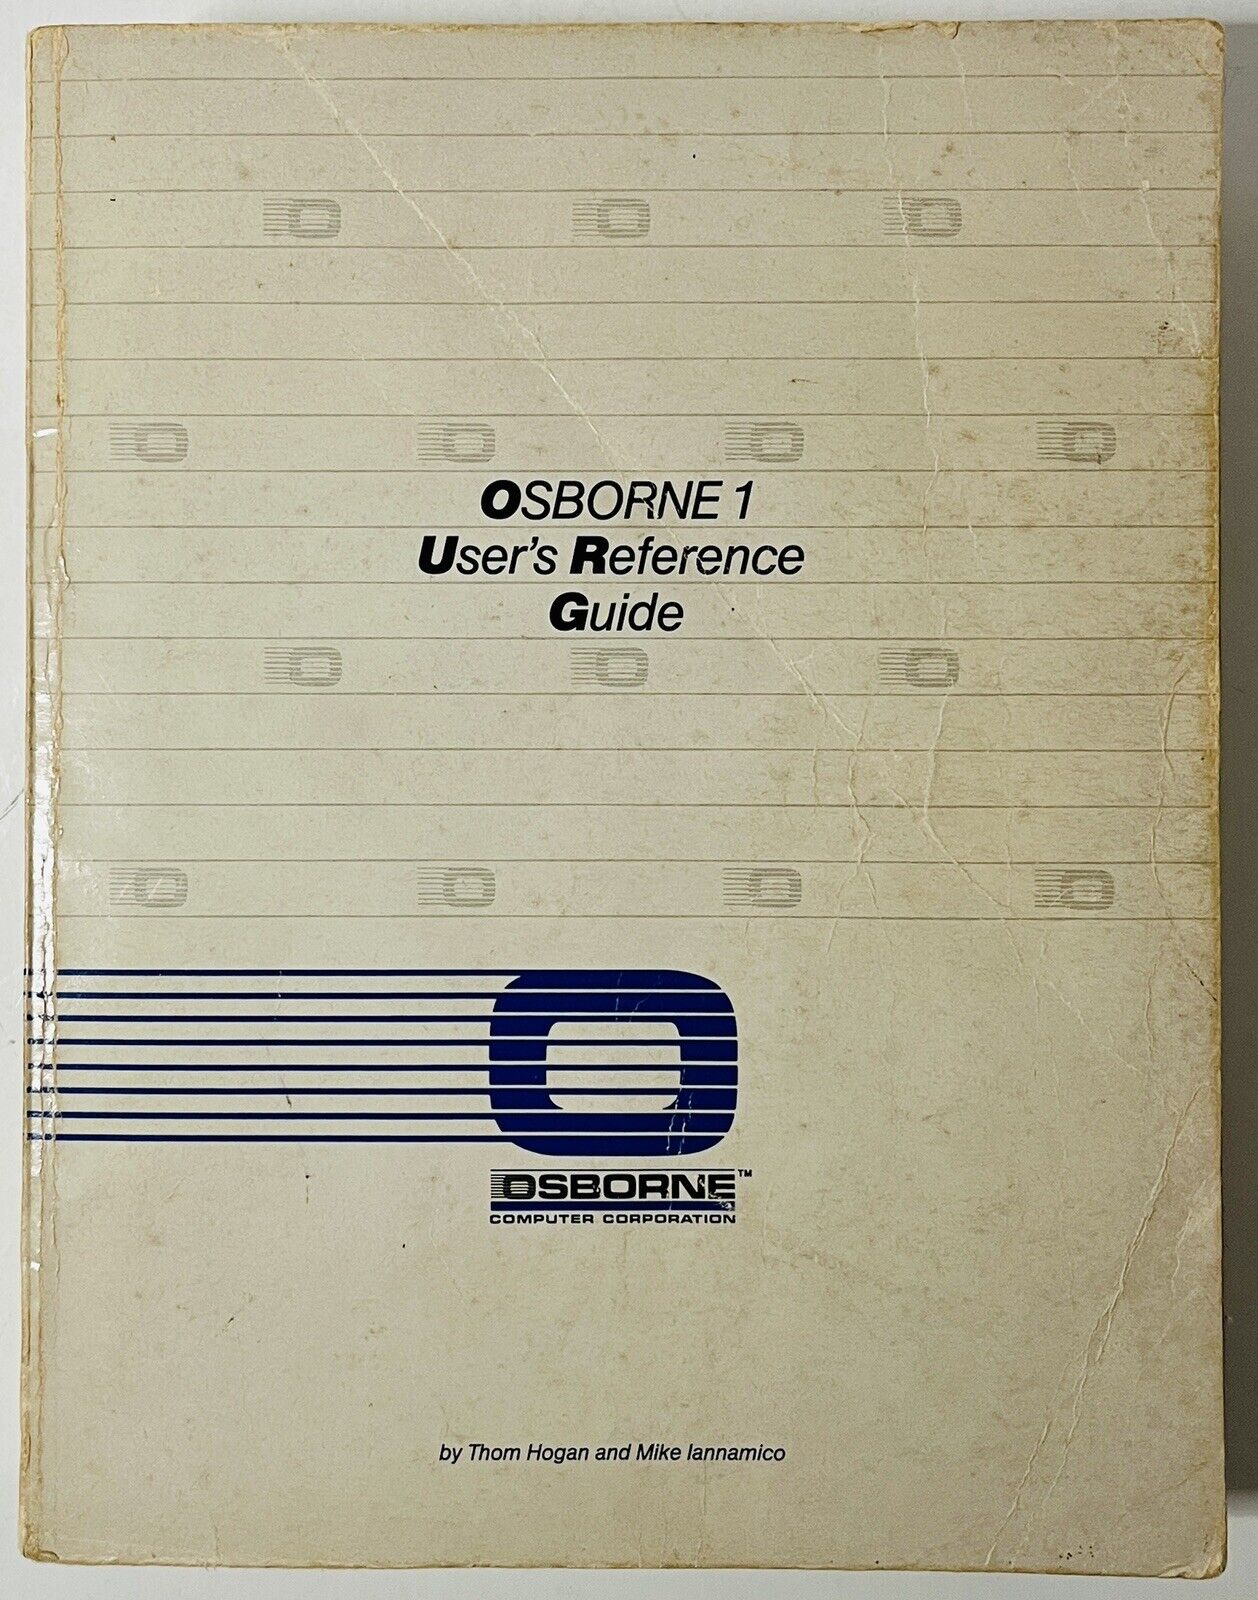 Osborne 1 User\'s Reference Guide Hogan & Iannamico 1981, 763 pages, VTG Computer